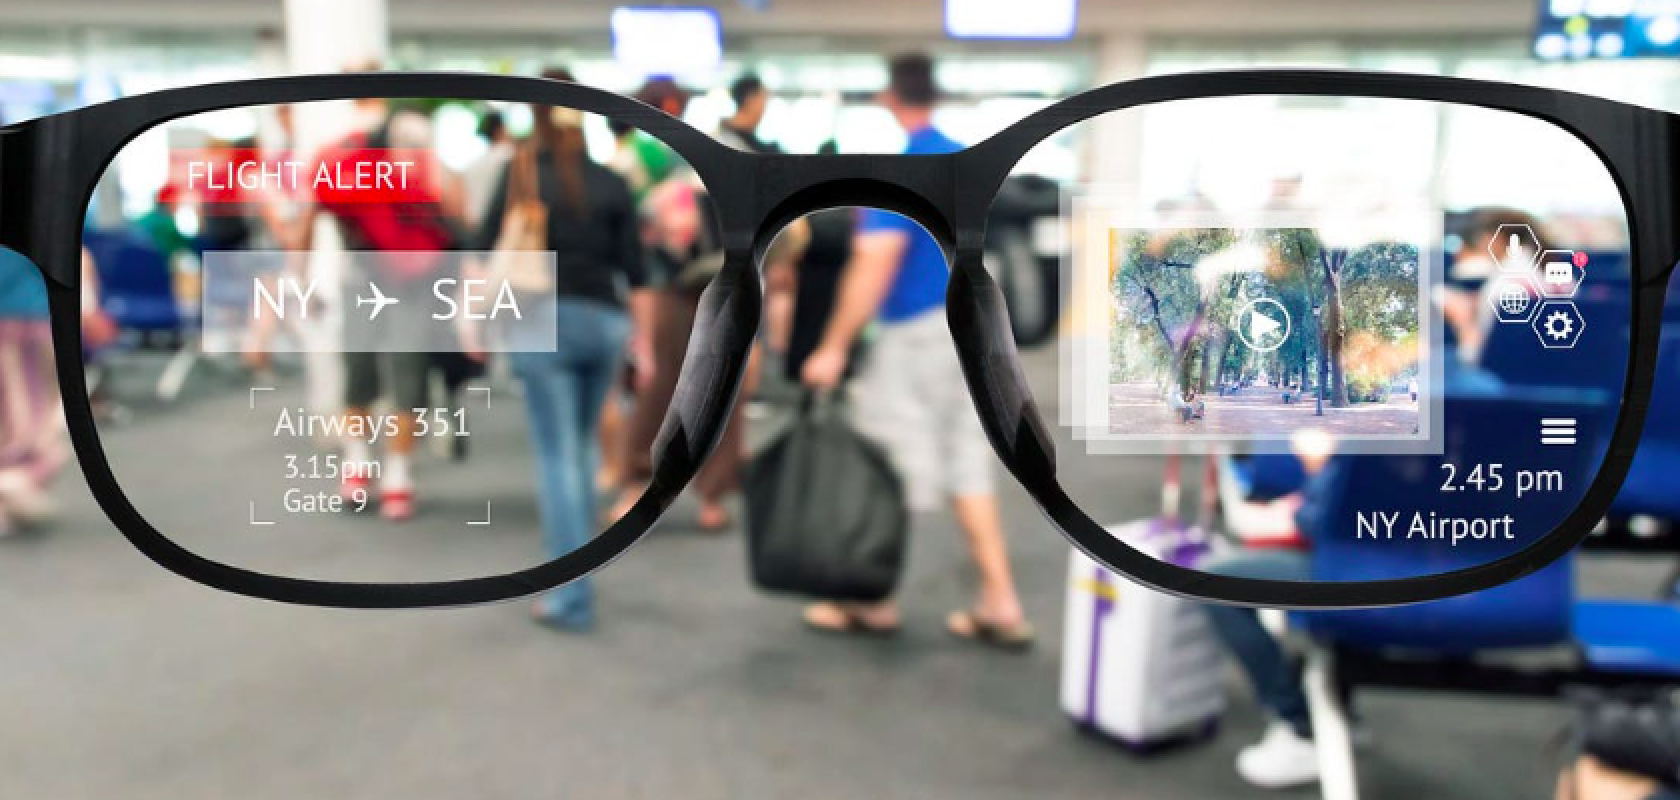 VitreaLab intends to use its technology to create lightweight and compact AR glasses (Image: VitreaLab)